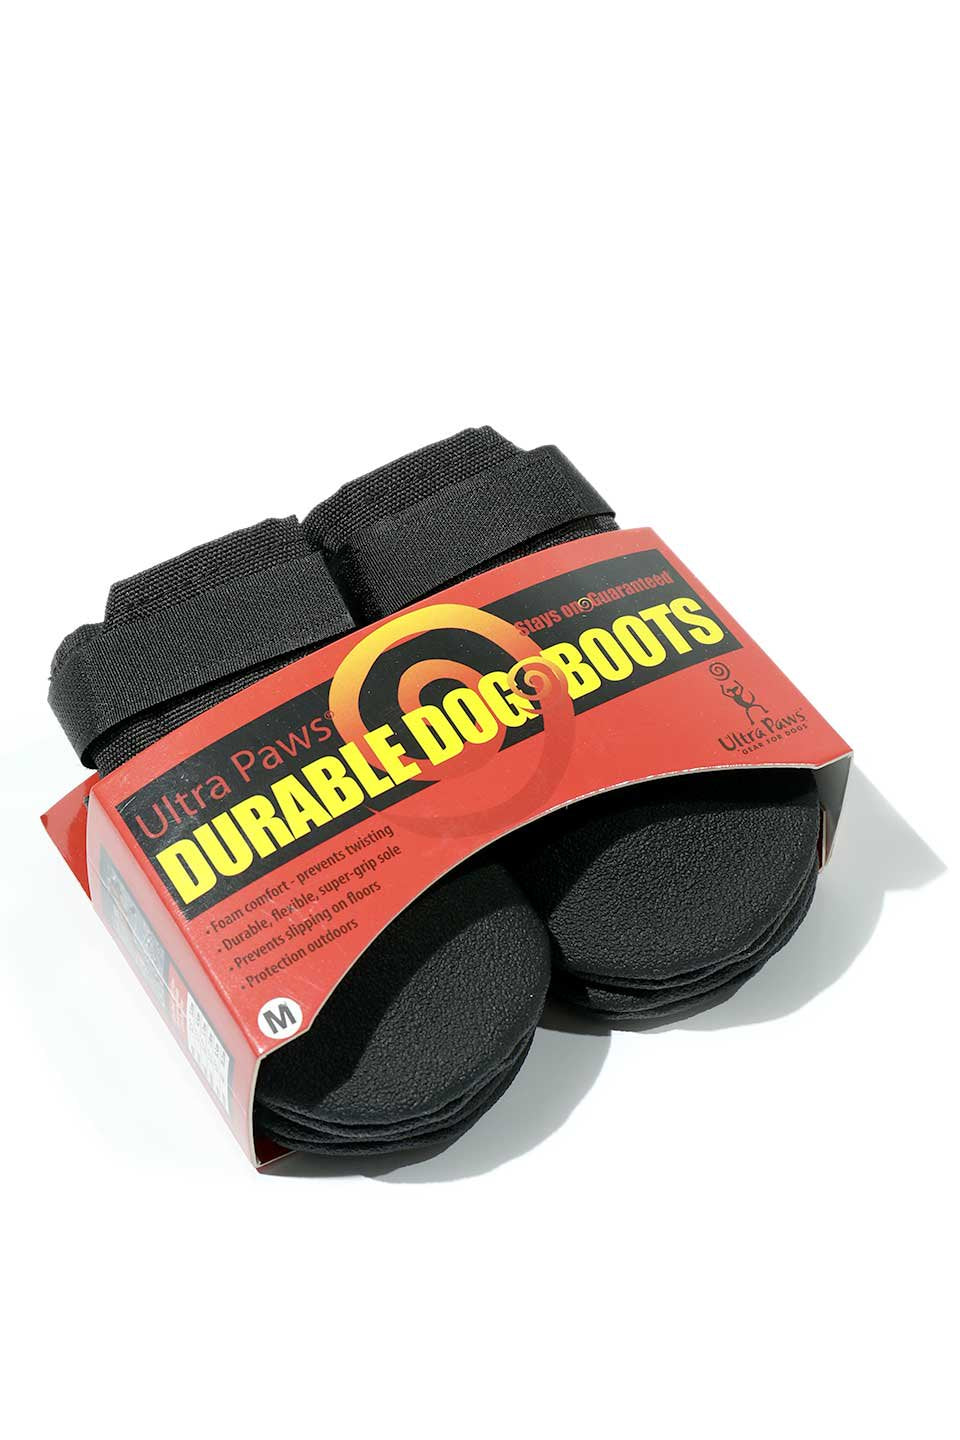 Durable Dog Boots オールラウンド・ドッグブーツ / Ultra Paws